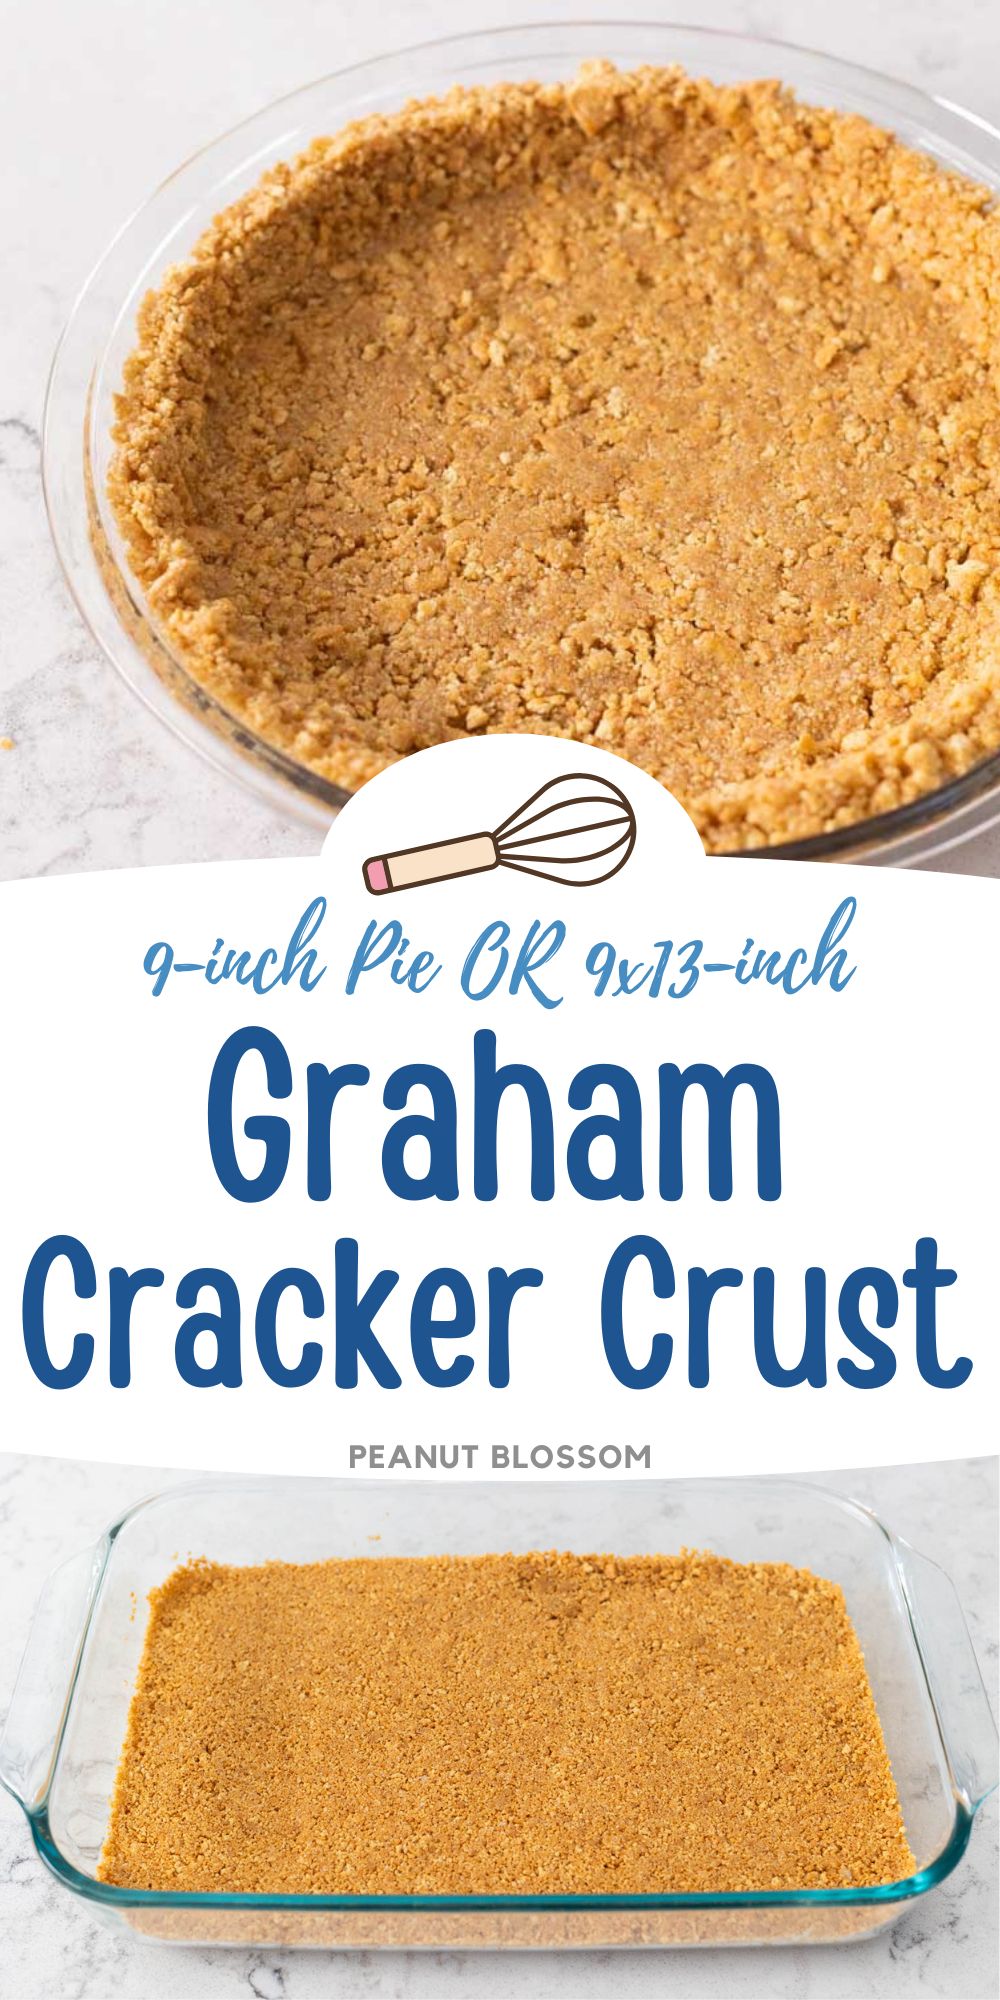 The photo collage shows both a 9-inch pie crust and a 9x13-inch graham cracker crust.